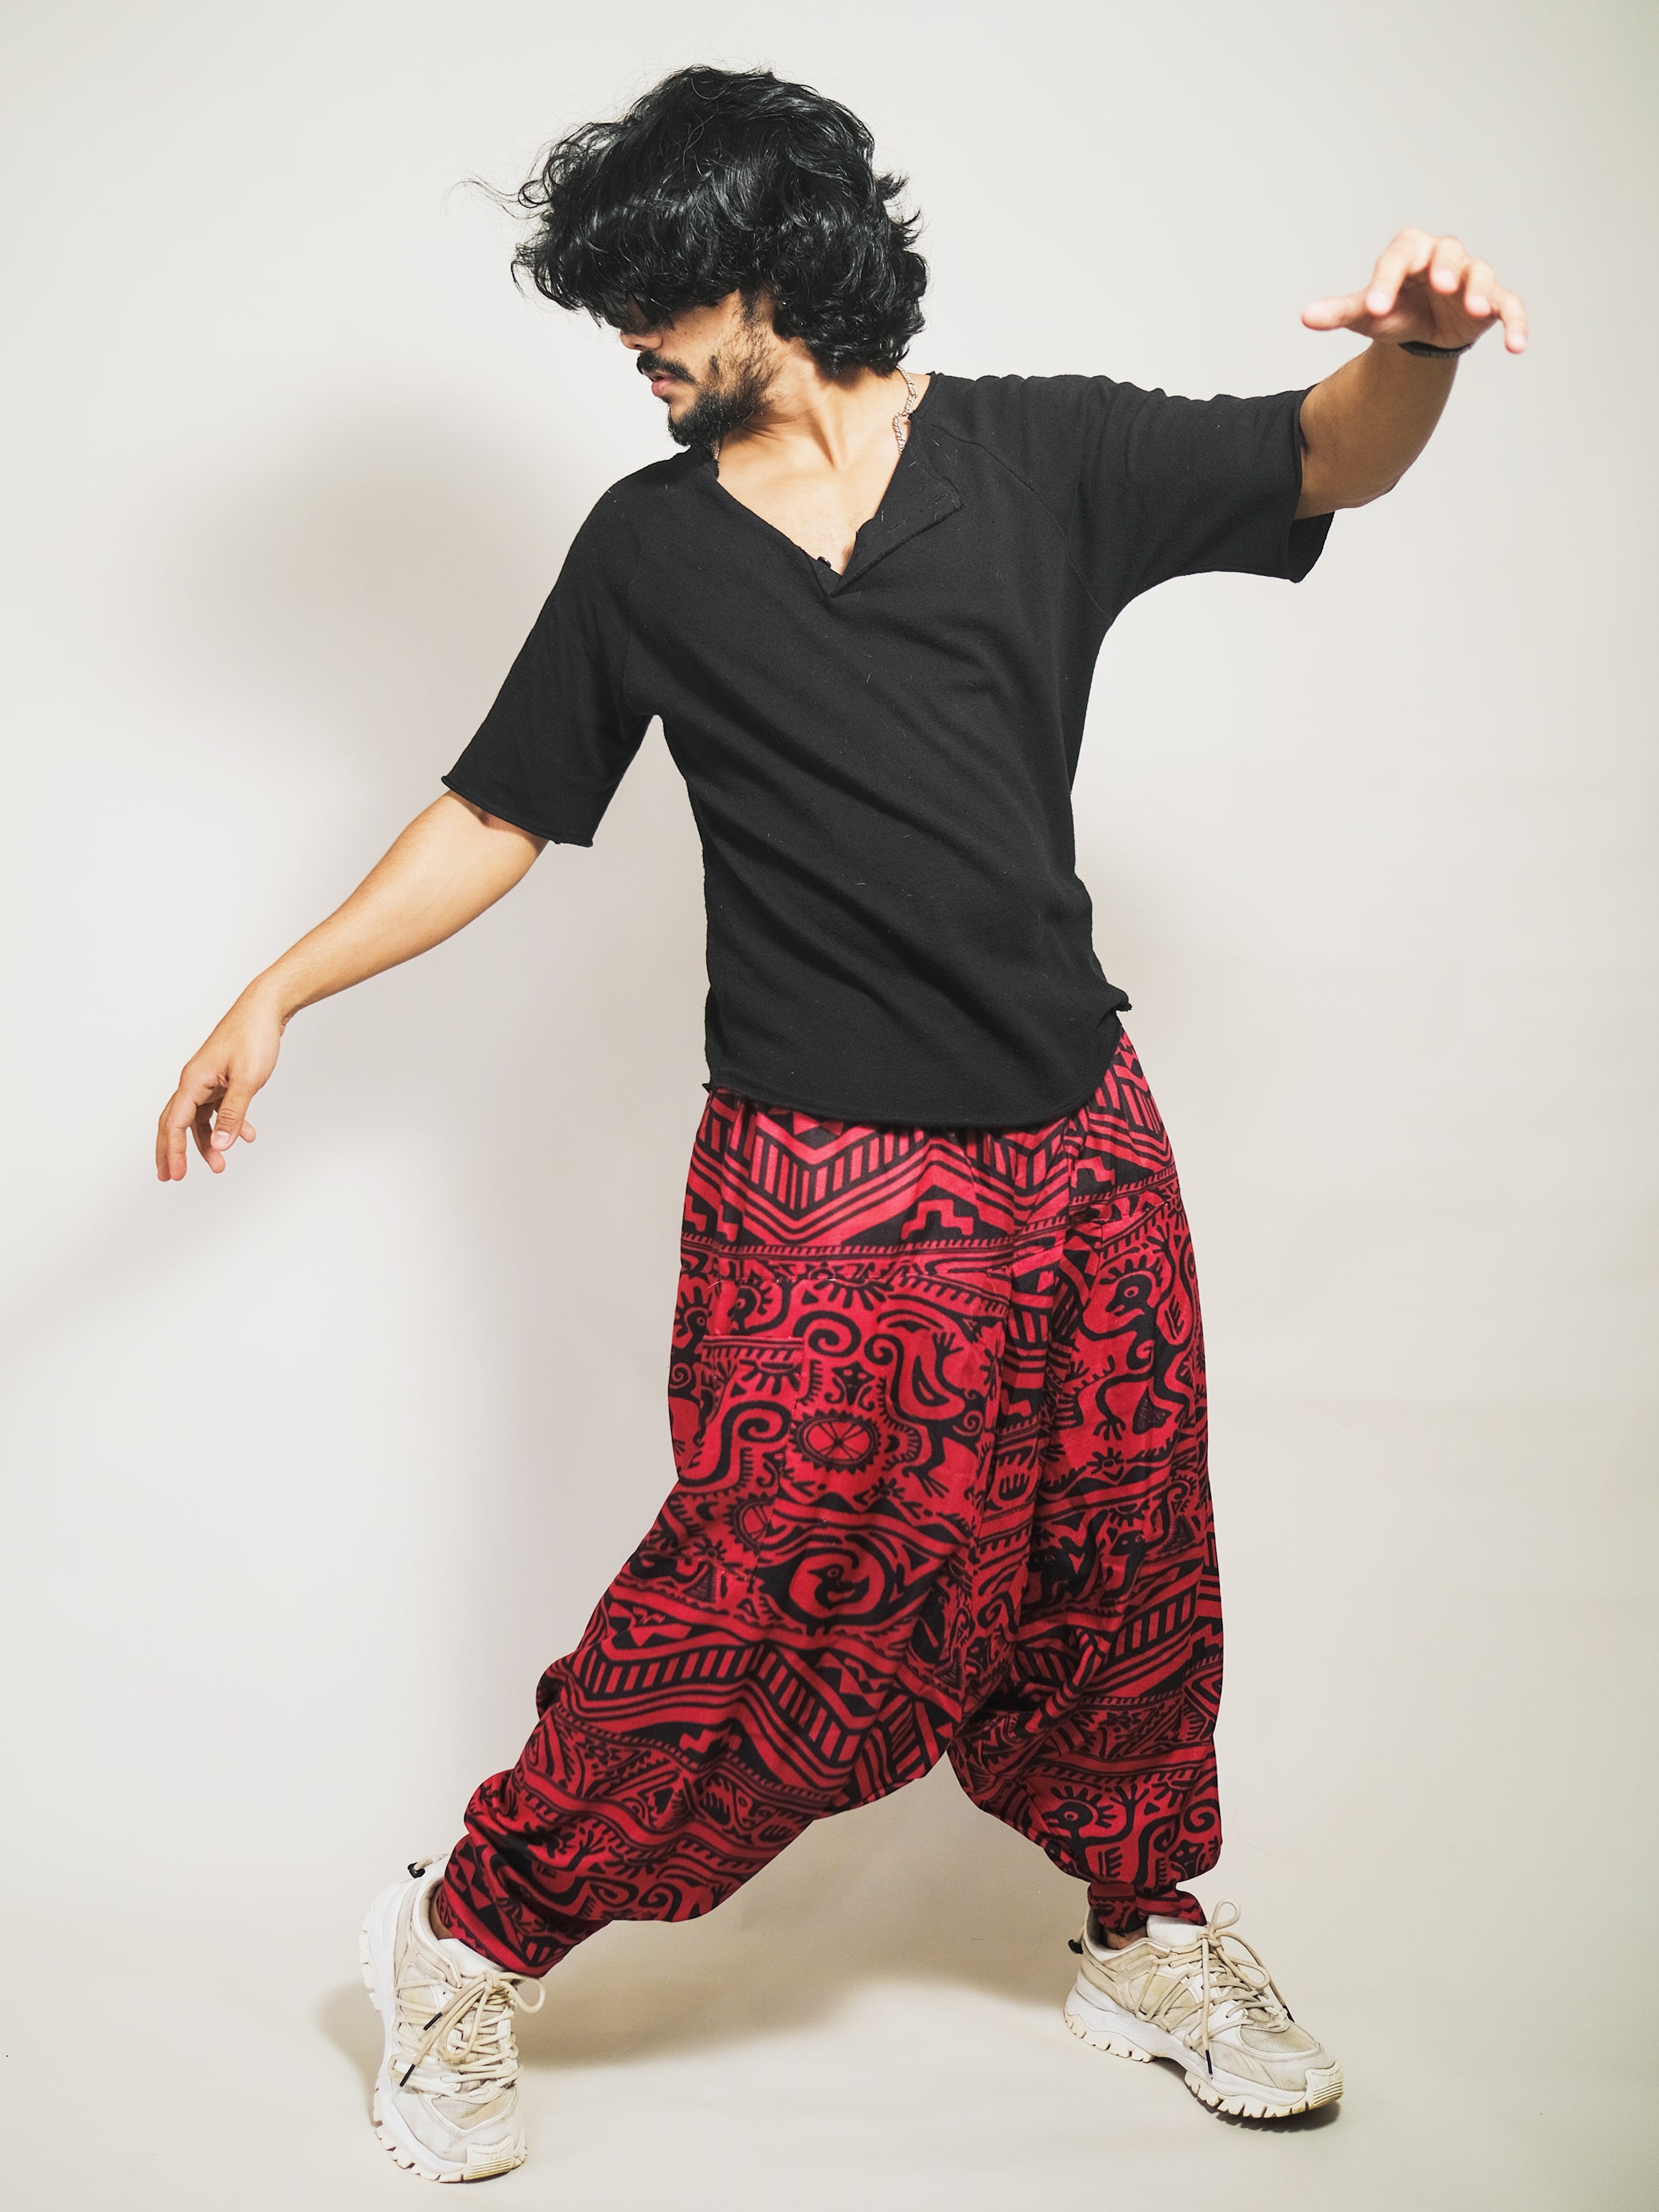 Designer Harikrishnan made inflated balloon pants and an outfit from wooden  beads